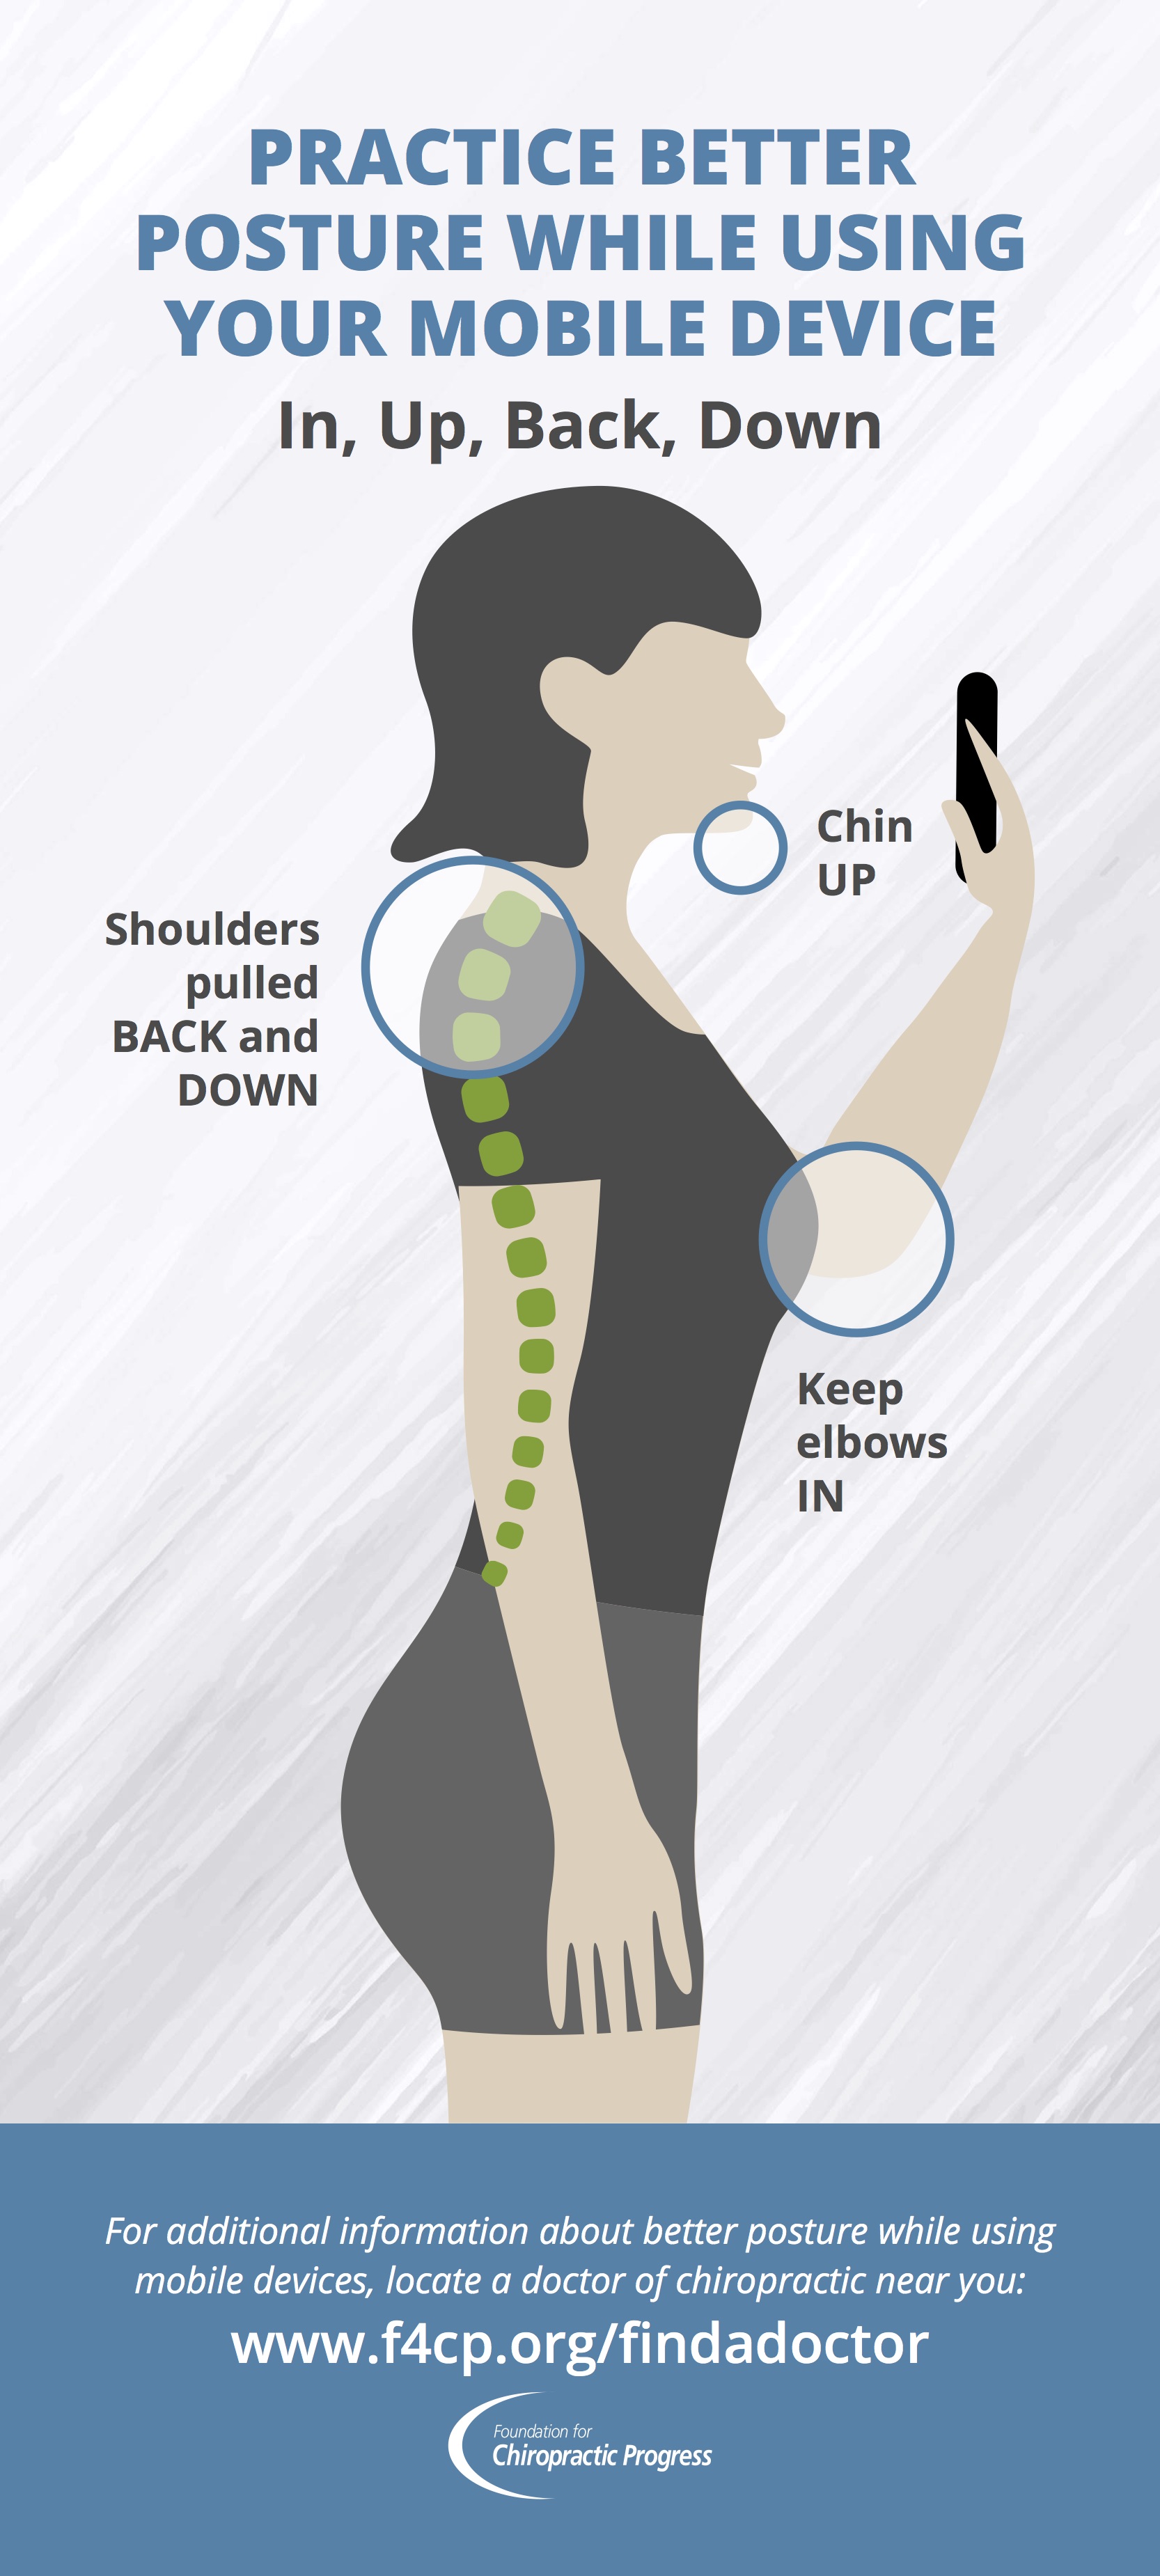 How Your Smartphone Impacts Your Posture